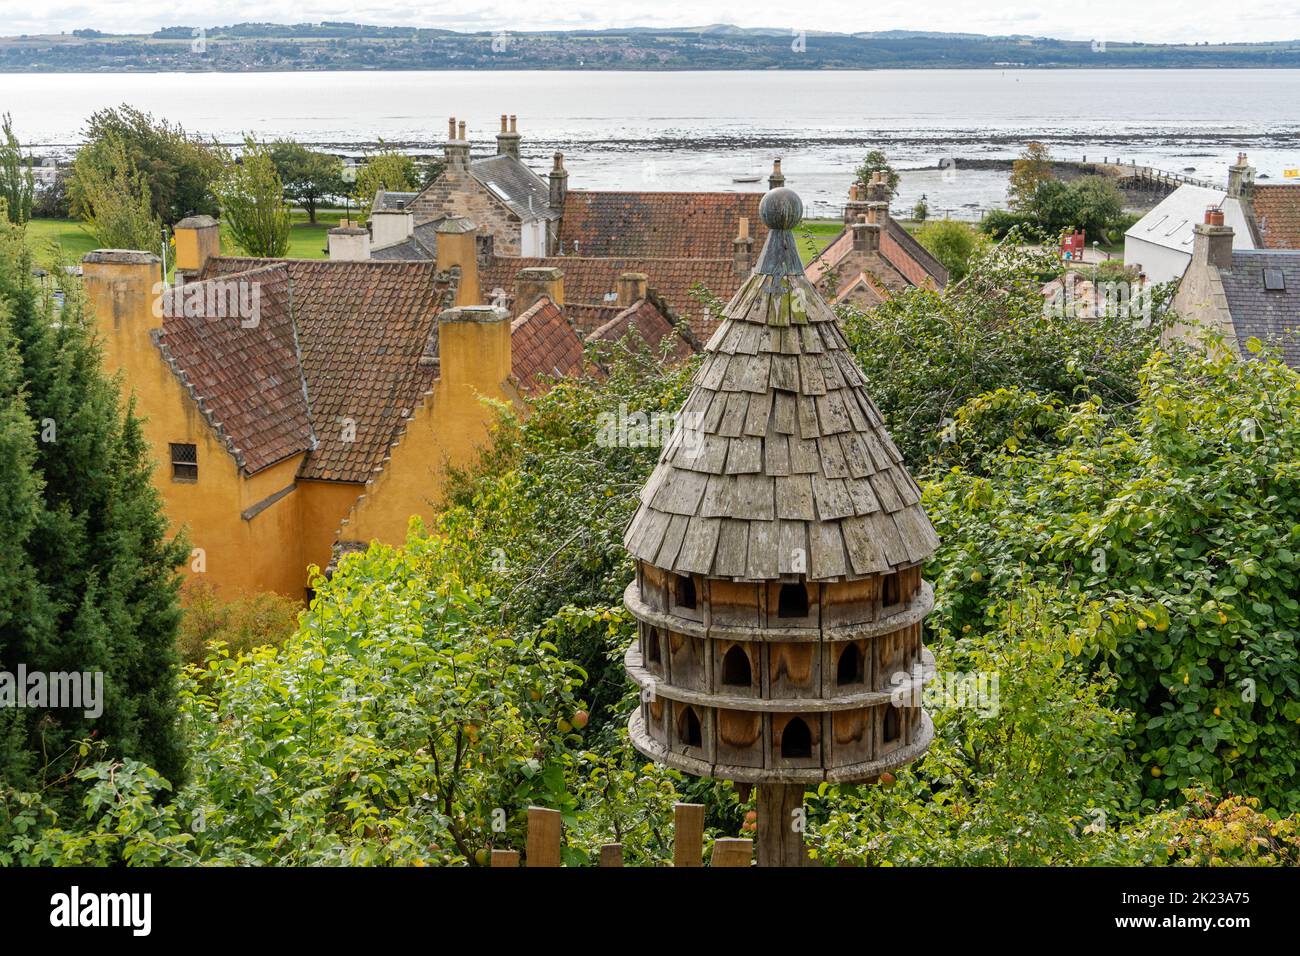 A view of Culross Palace in Culross, Scotland, UK - a 17th century National Trust for Scotland property with ochre walls. Stock Photo